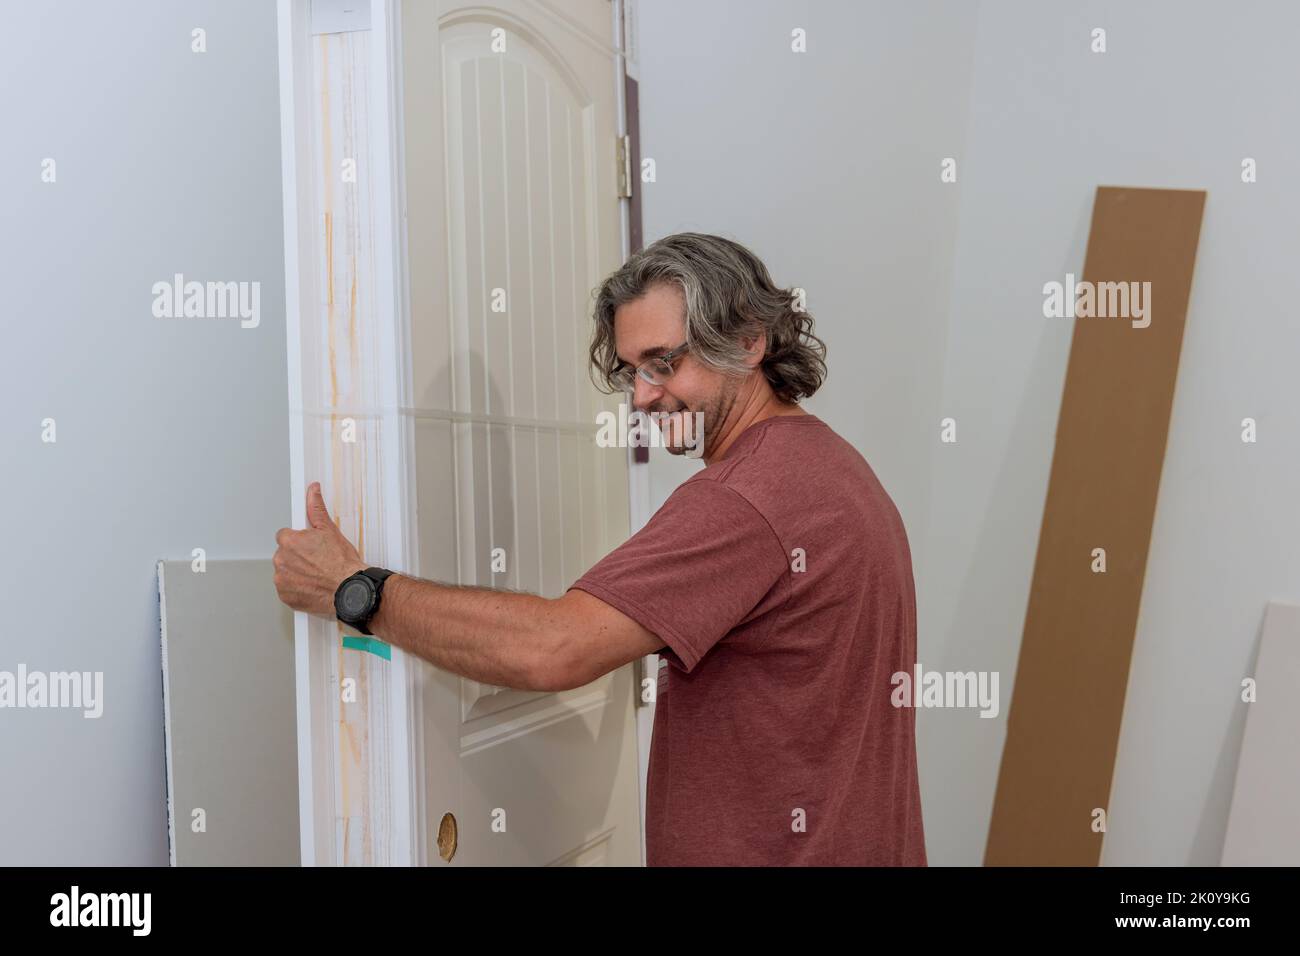 The worker holds the door in preparation for installation in a new house Stock Photo